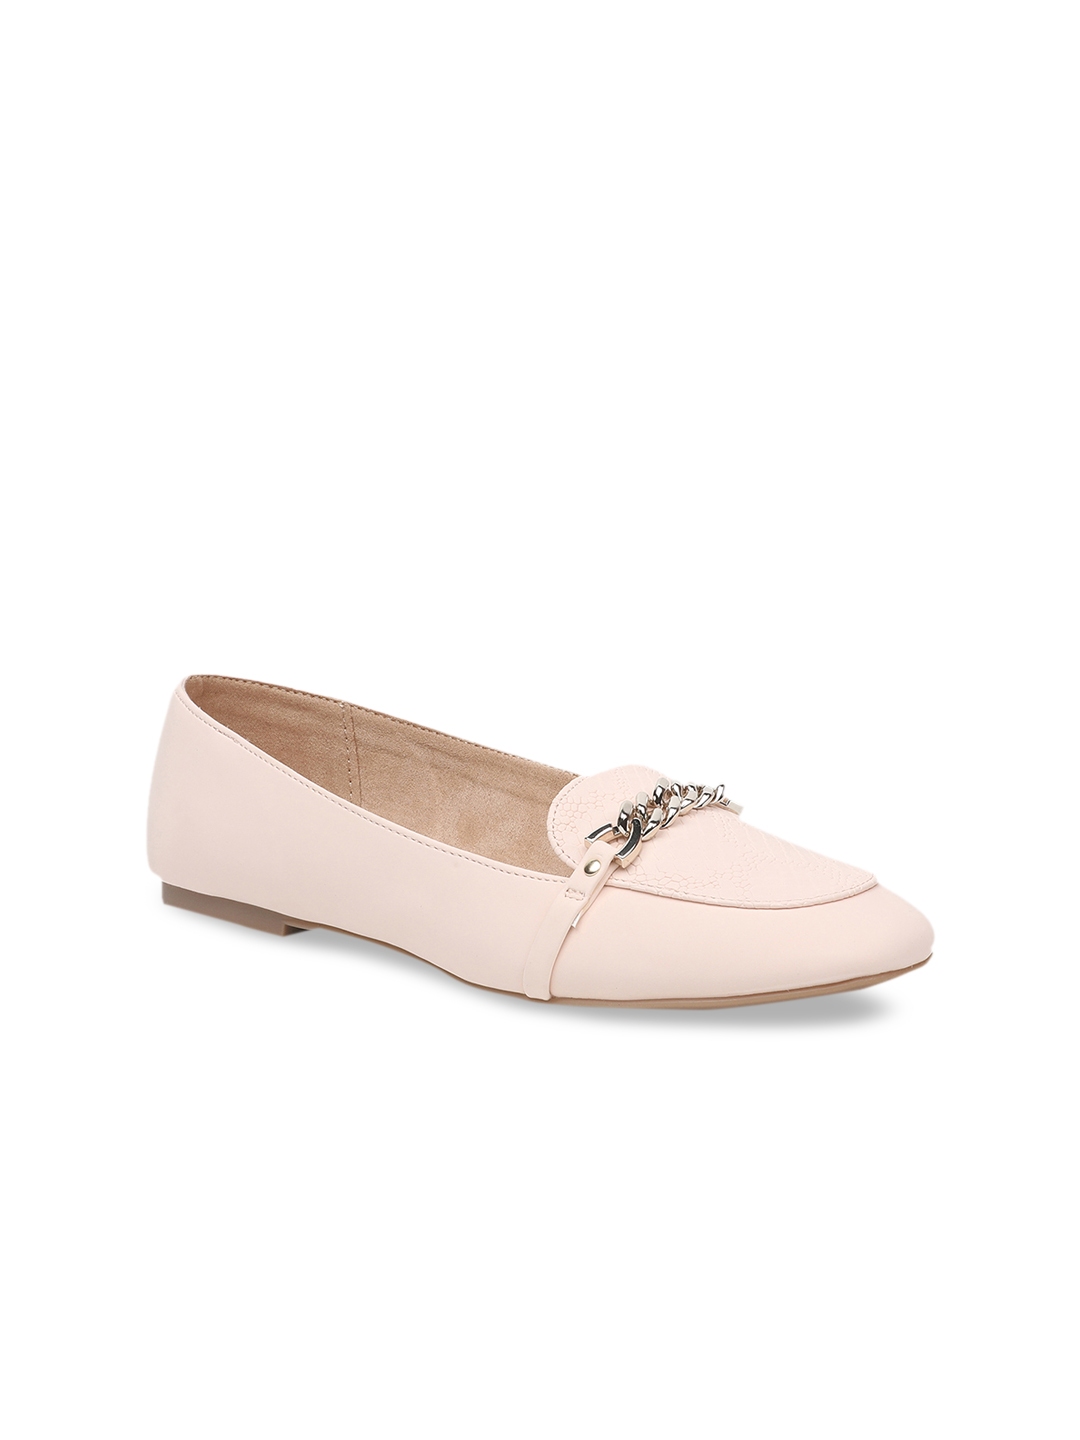 light pink loafers